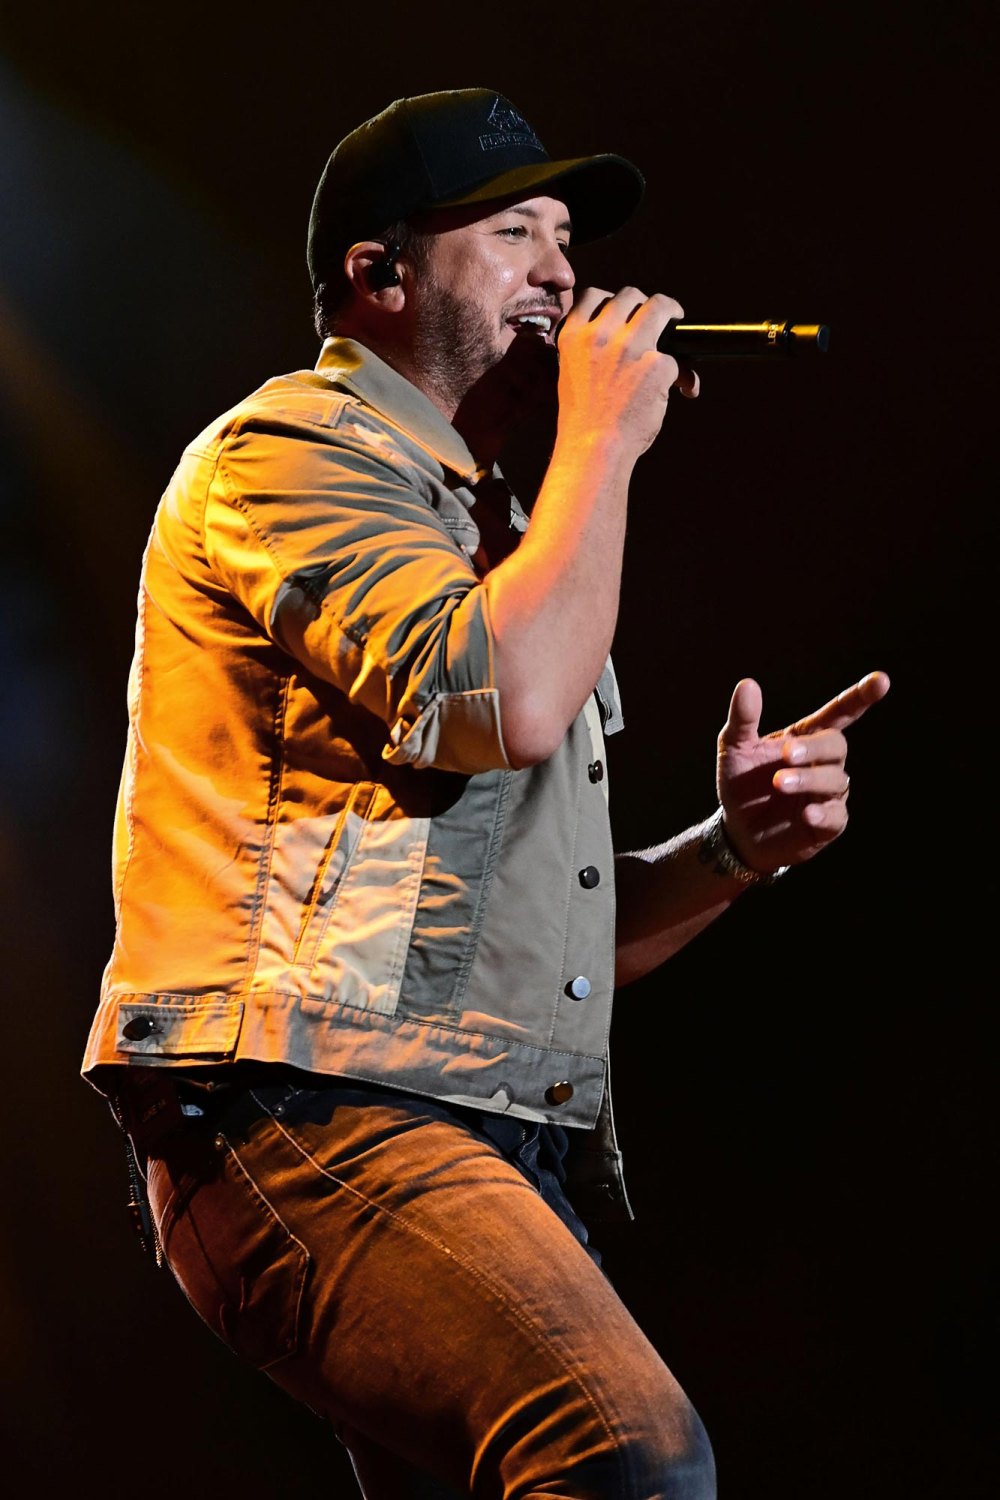 Luke-Bryan-Admits-He-s--Not-Balancing--His-Work-and-Family--That-Well--Right-Now--Wants-to--Slow-Down--After--Rough-Year- -391 Luke Bryan